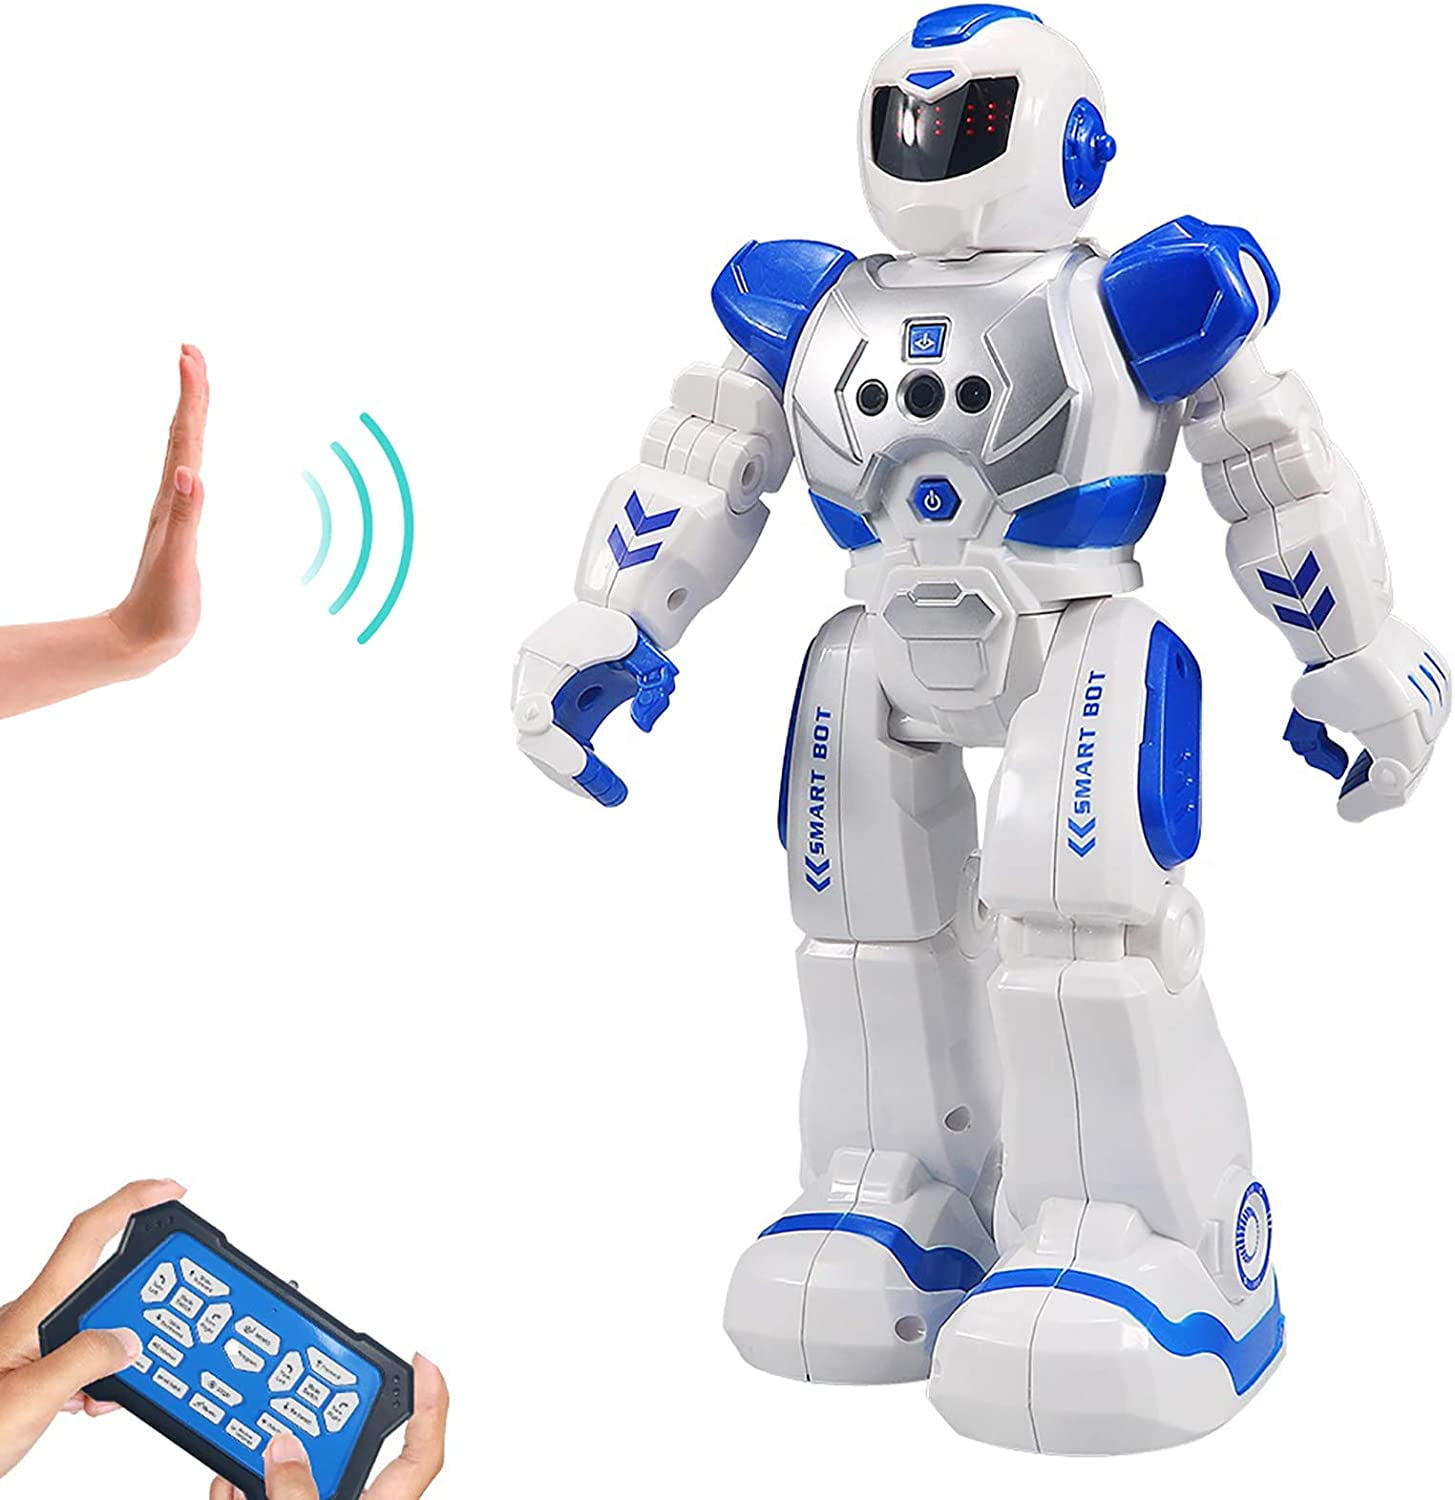 Smart Robots Lawrence Special Deal Remote Control FOR Kids Programmable LED Eyes